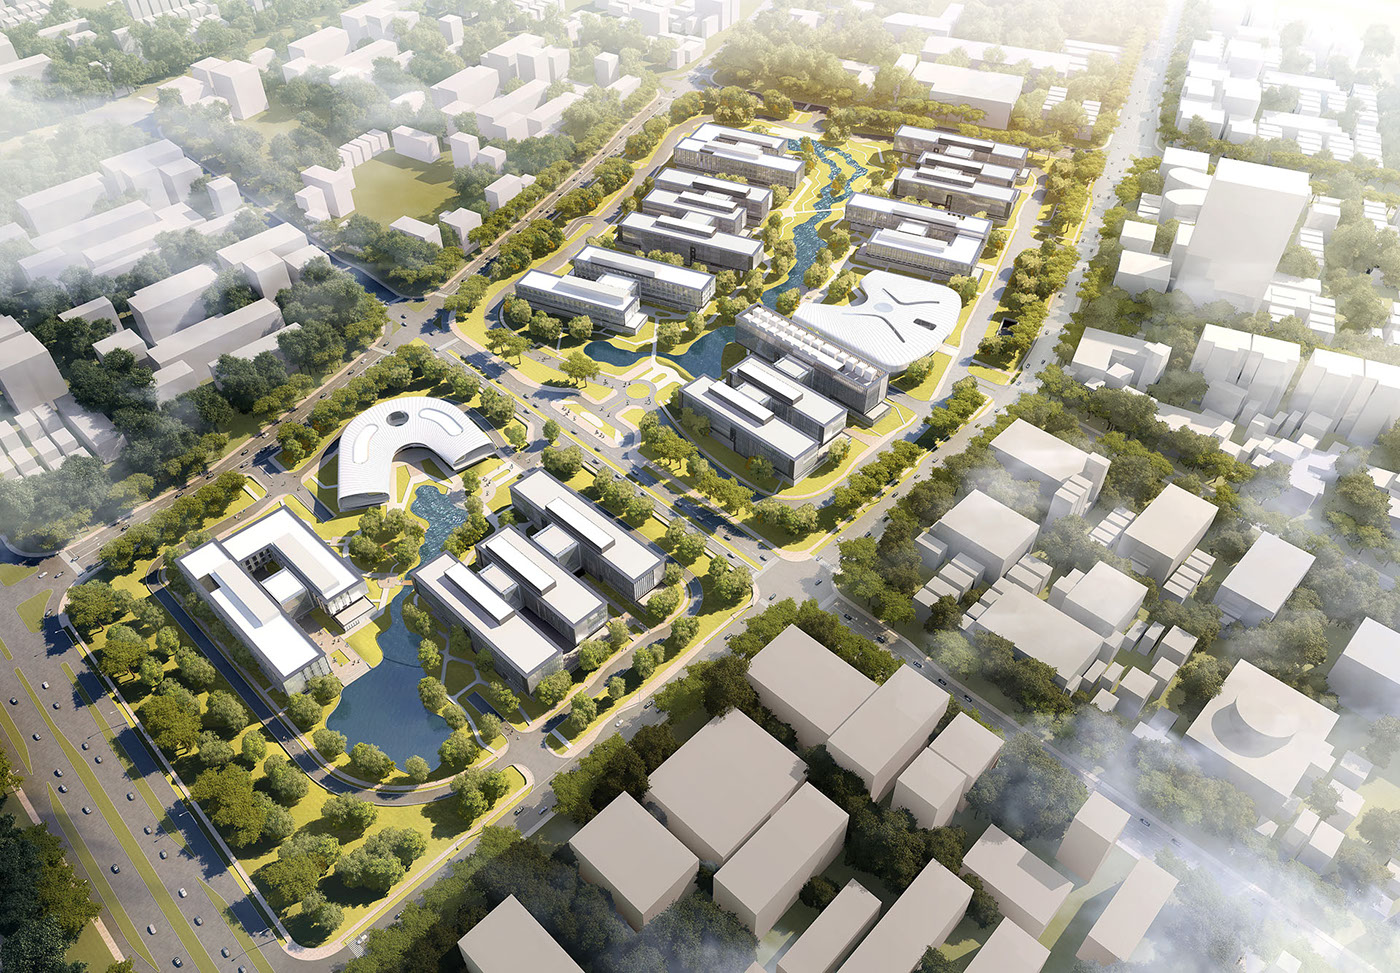 Mixed-Use Wuhan china laboratories data center campus Ennead Ennead Architects